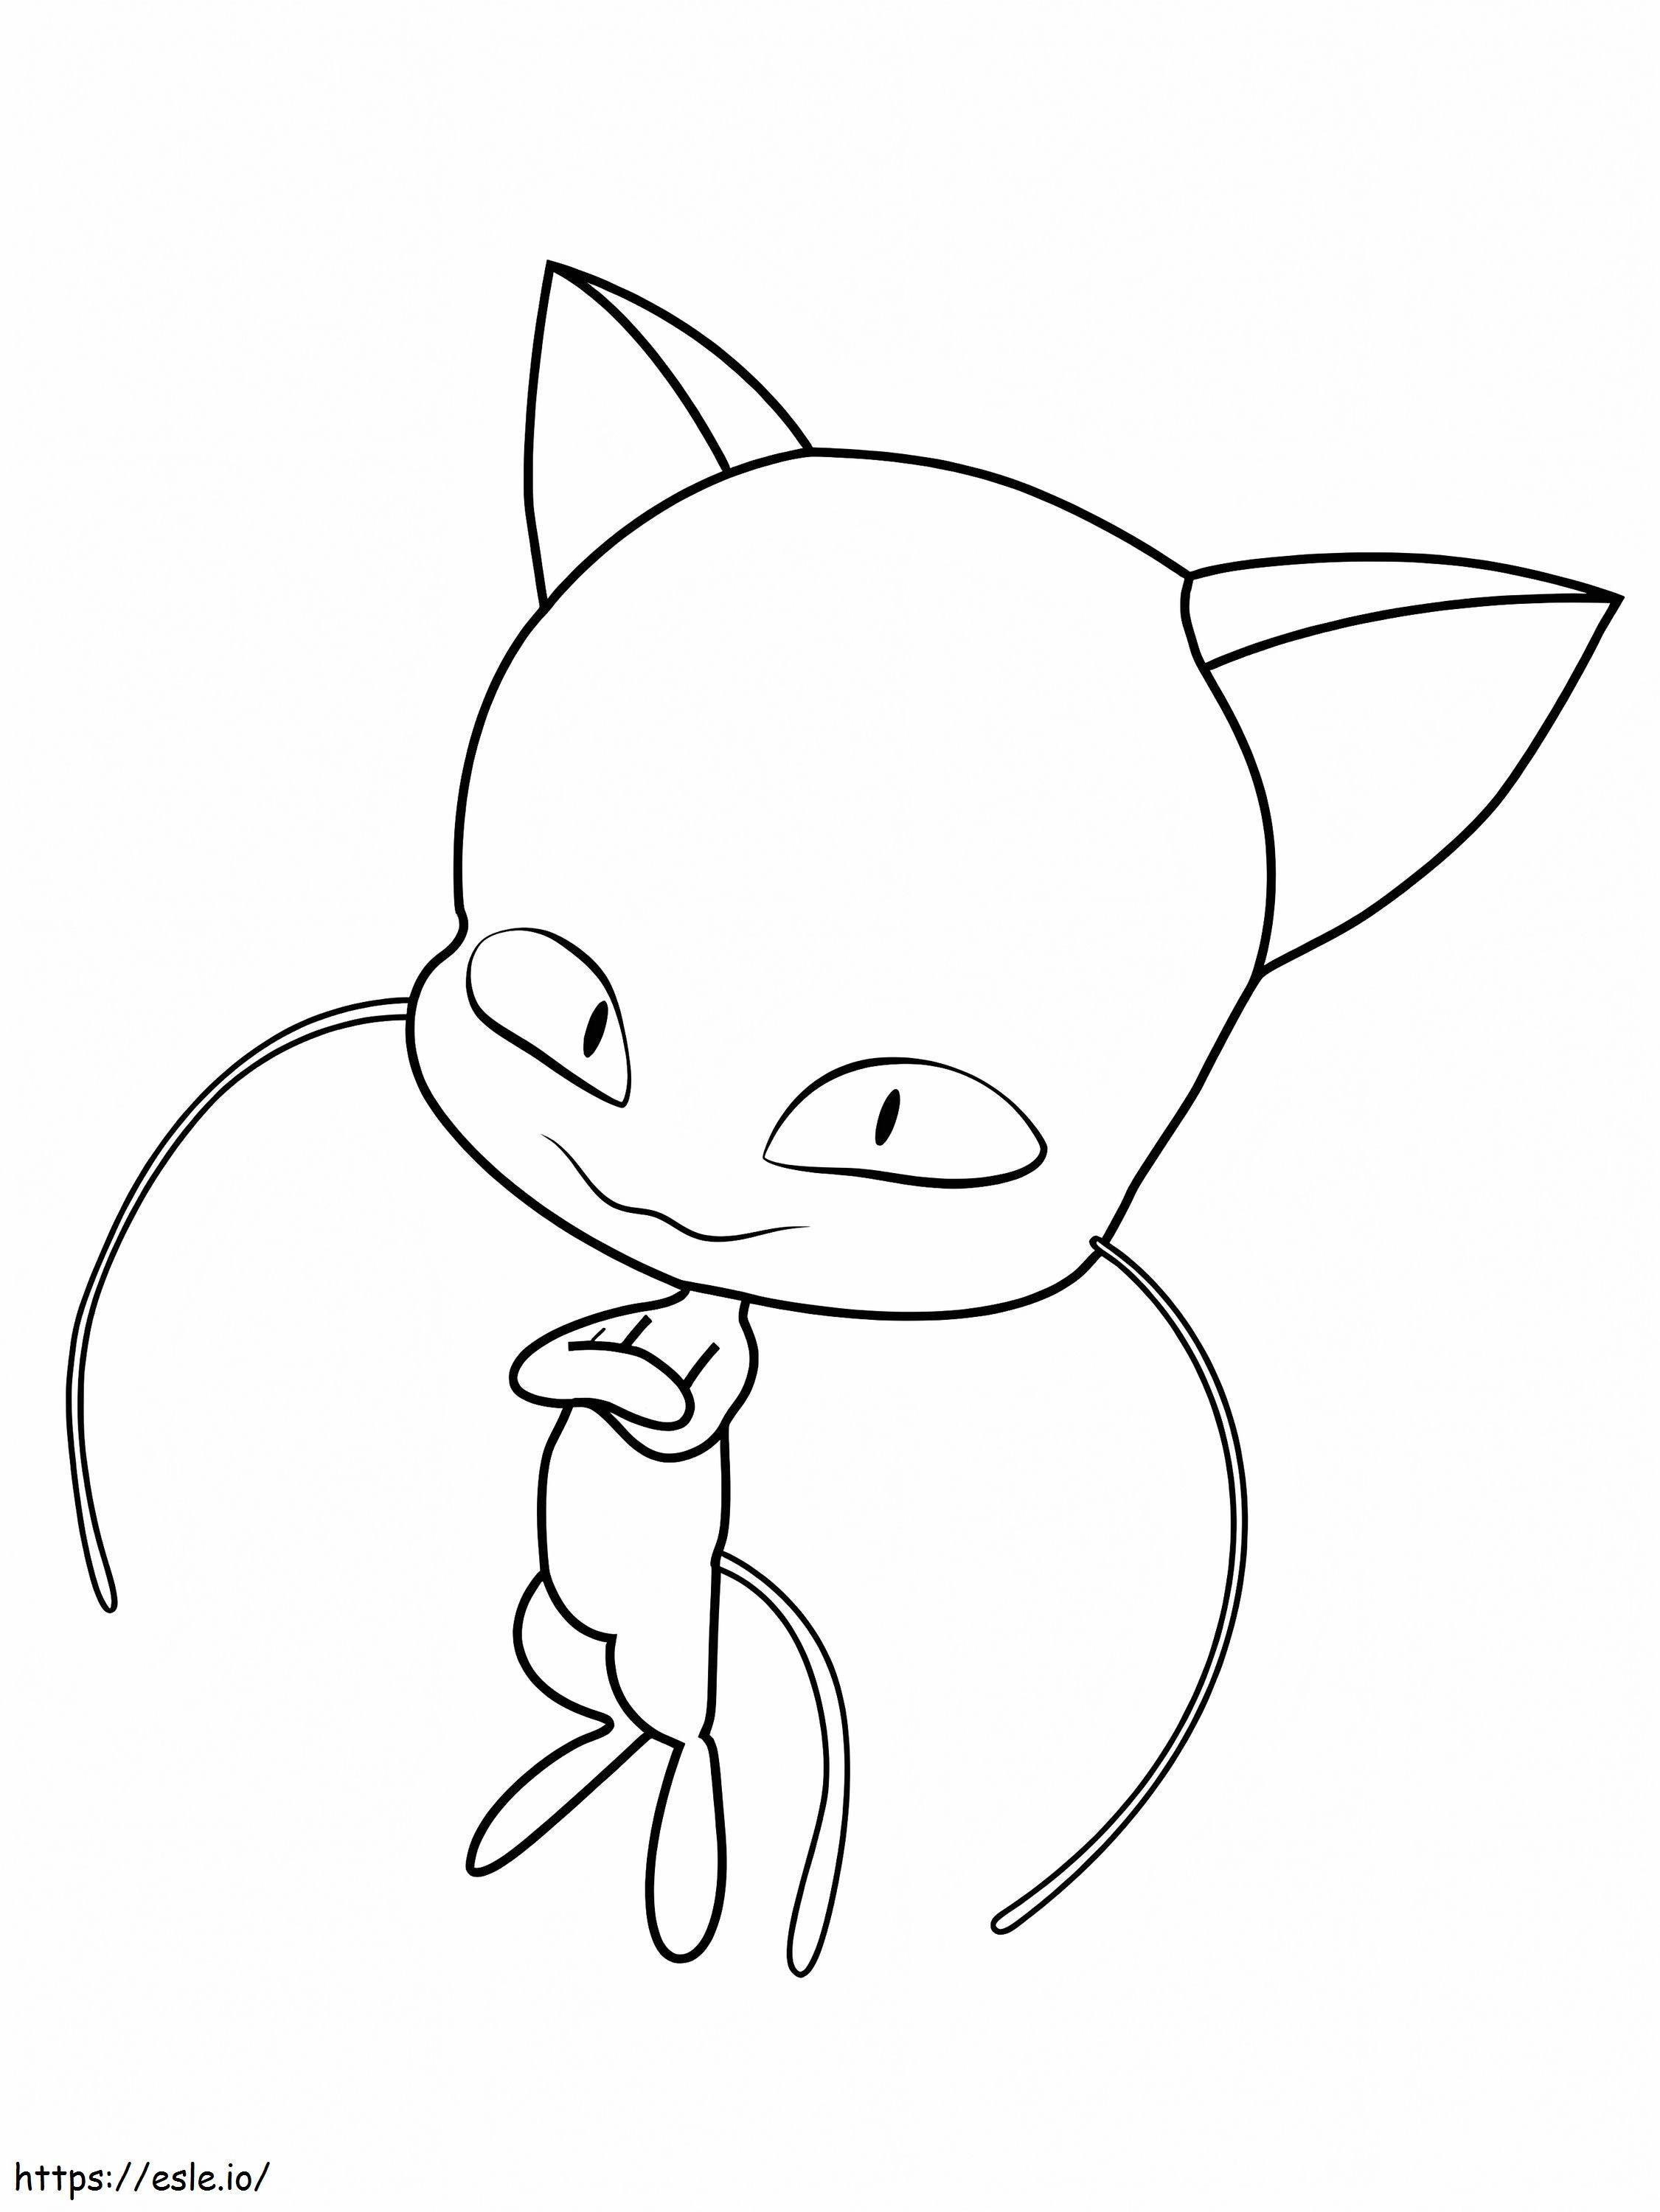 To Me Plagg coloring page